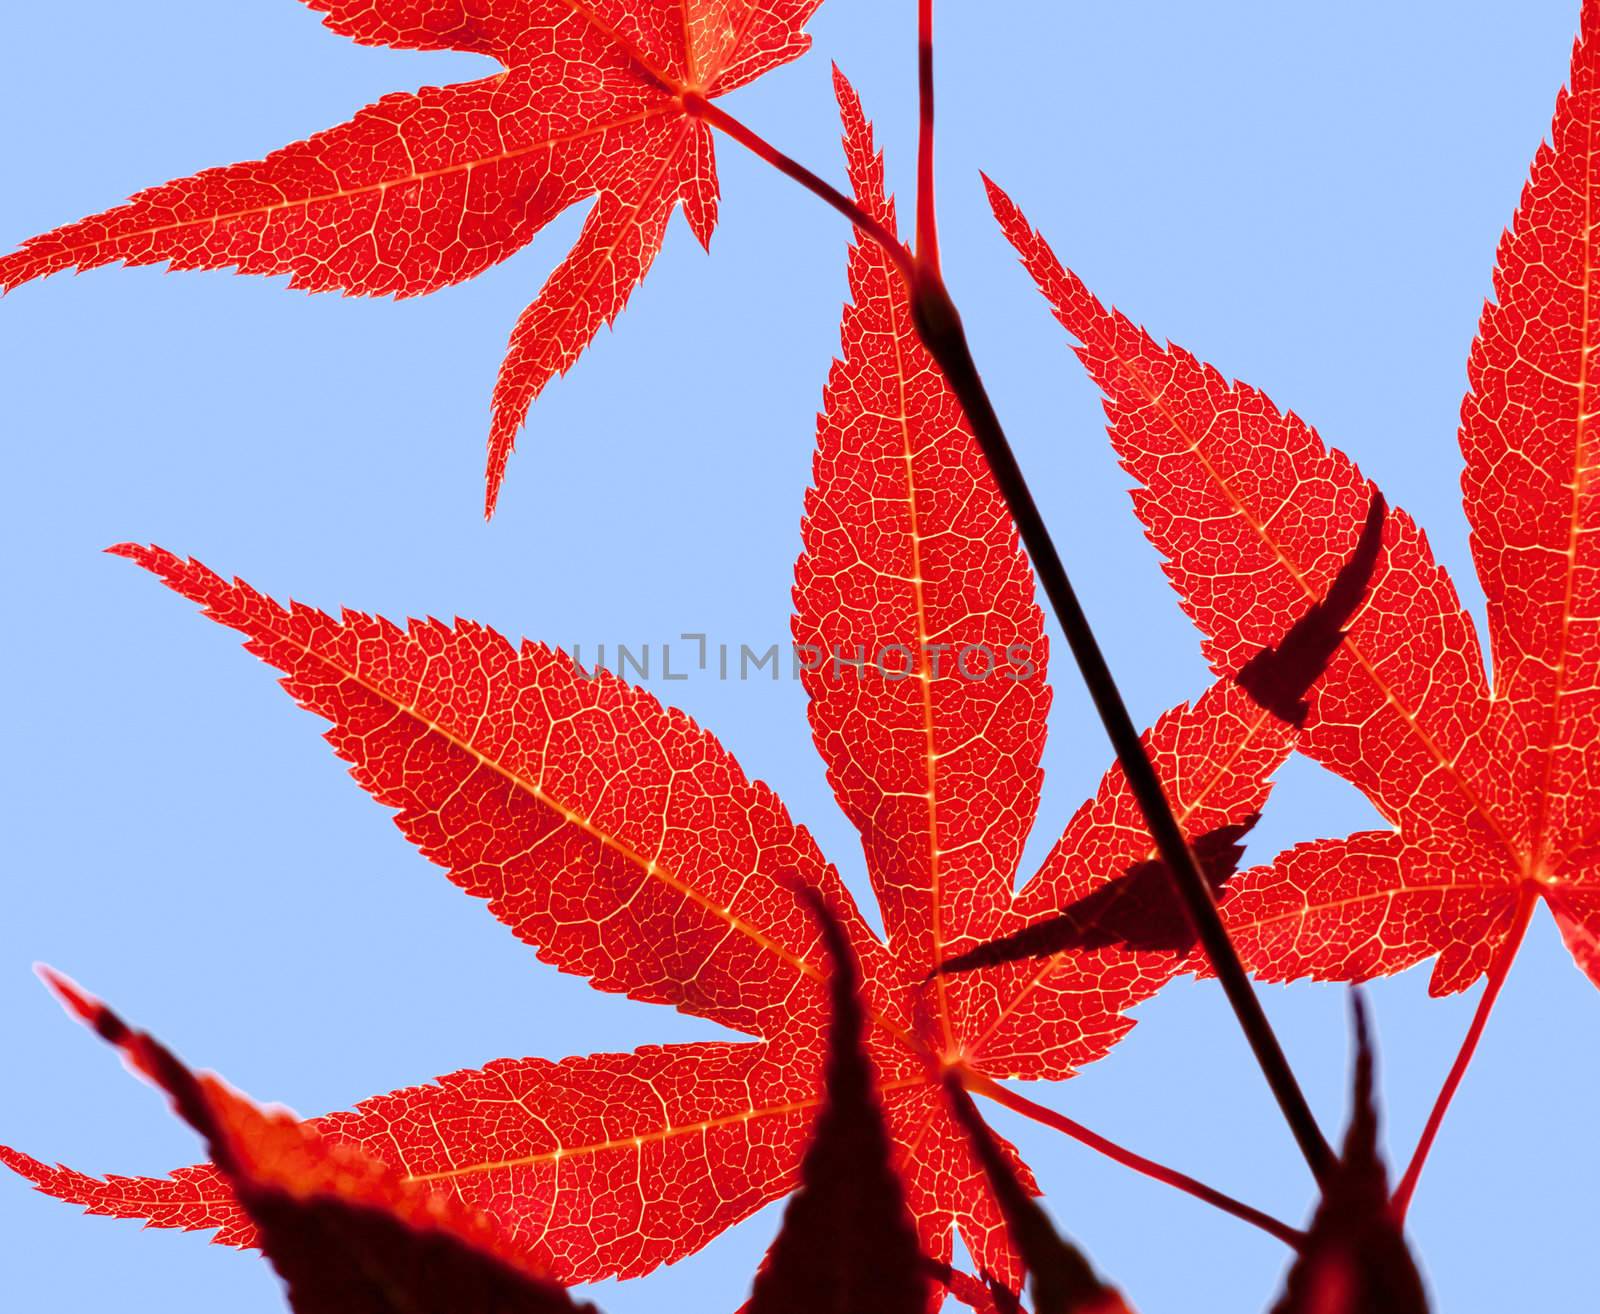 An image of a red maple leaf background